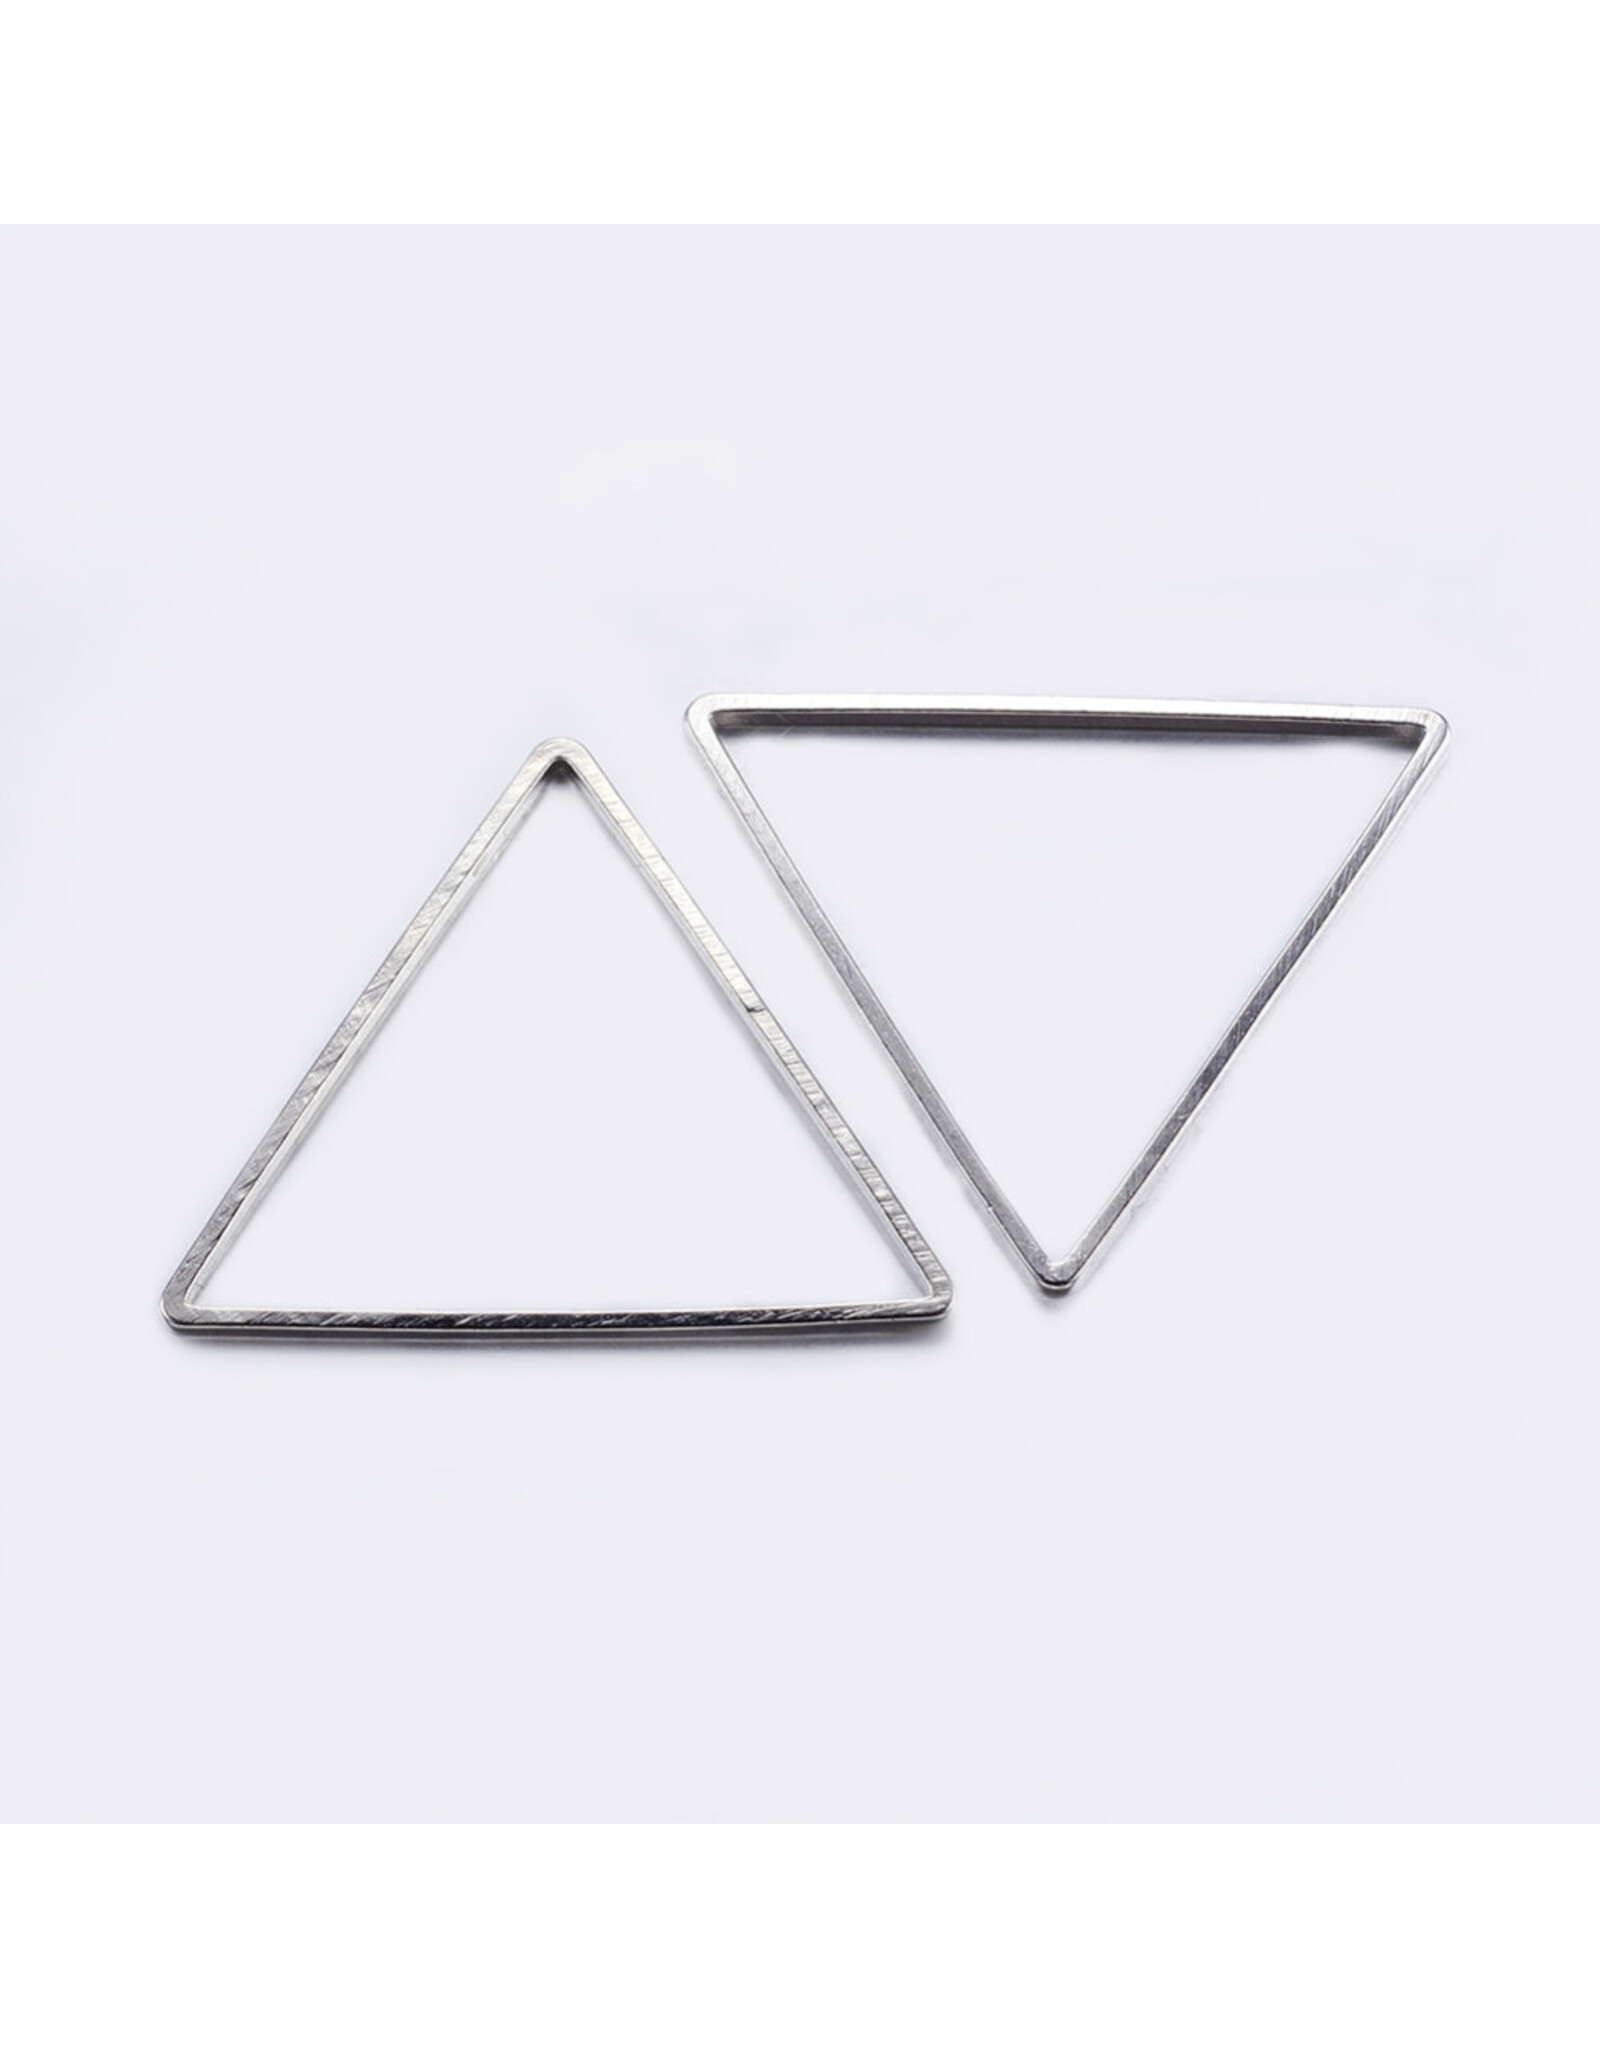 Triangle Link Silver 24x27x.8mm  x10 NF